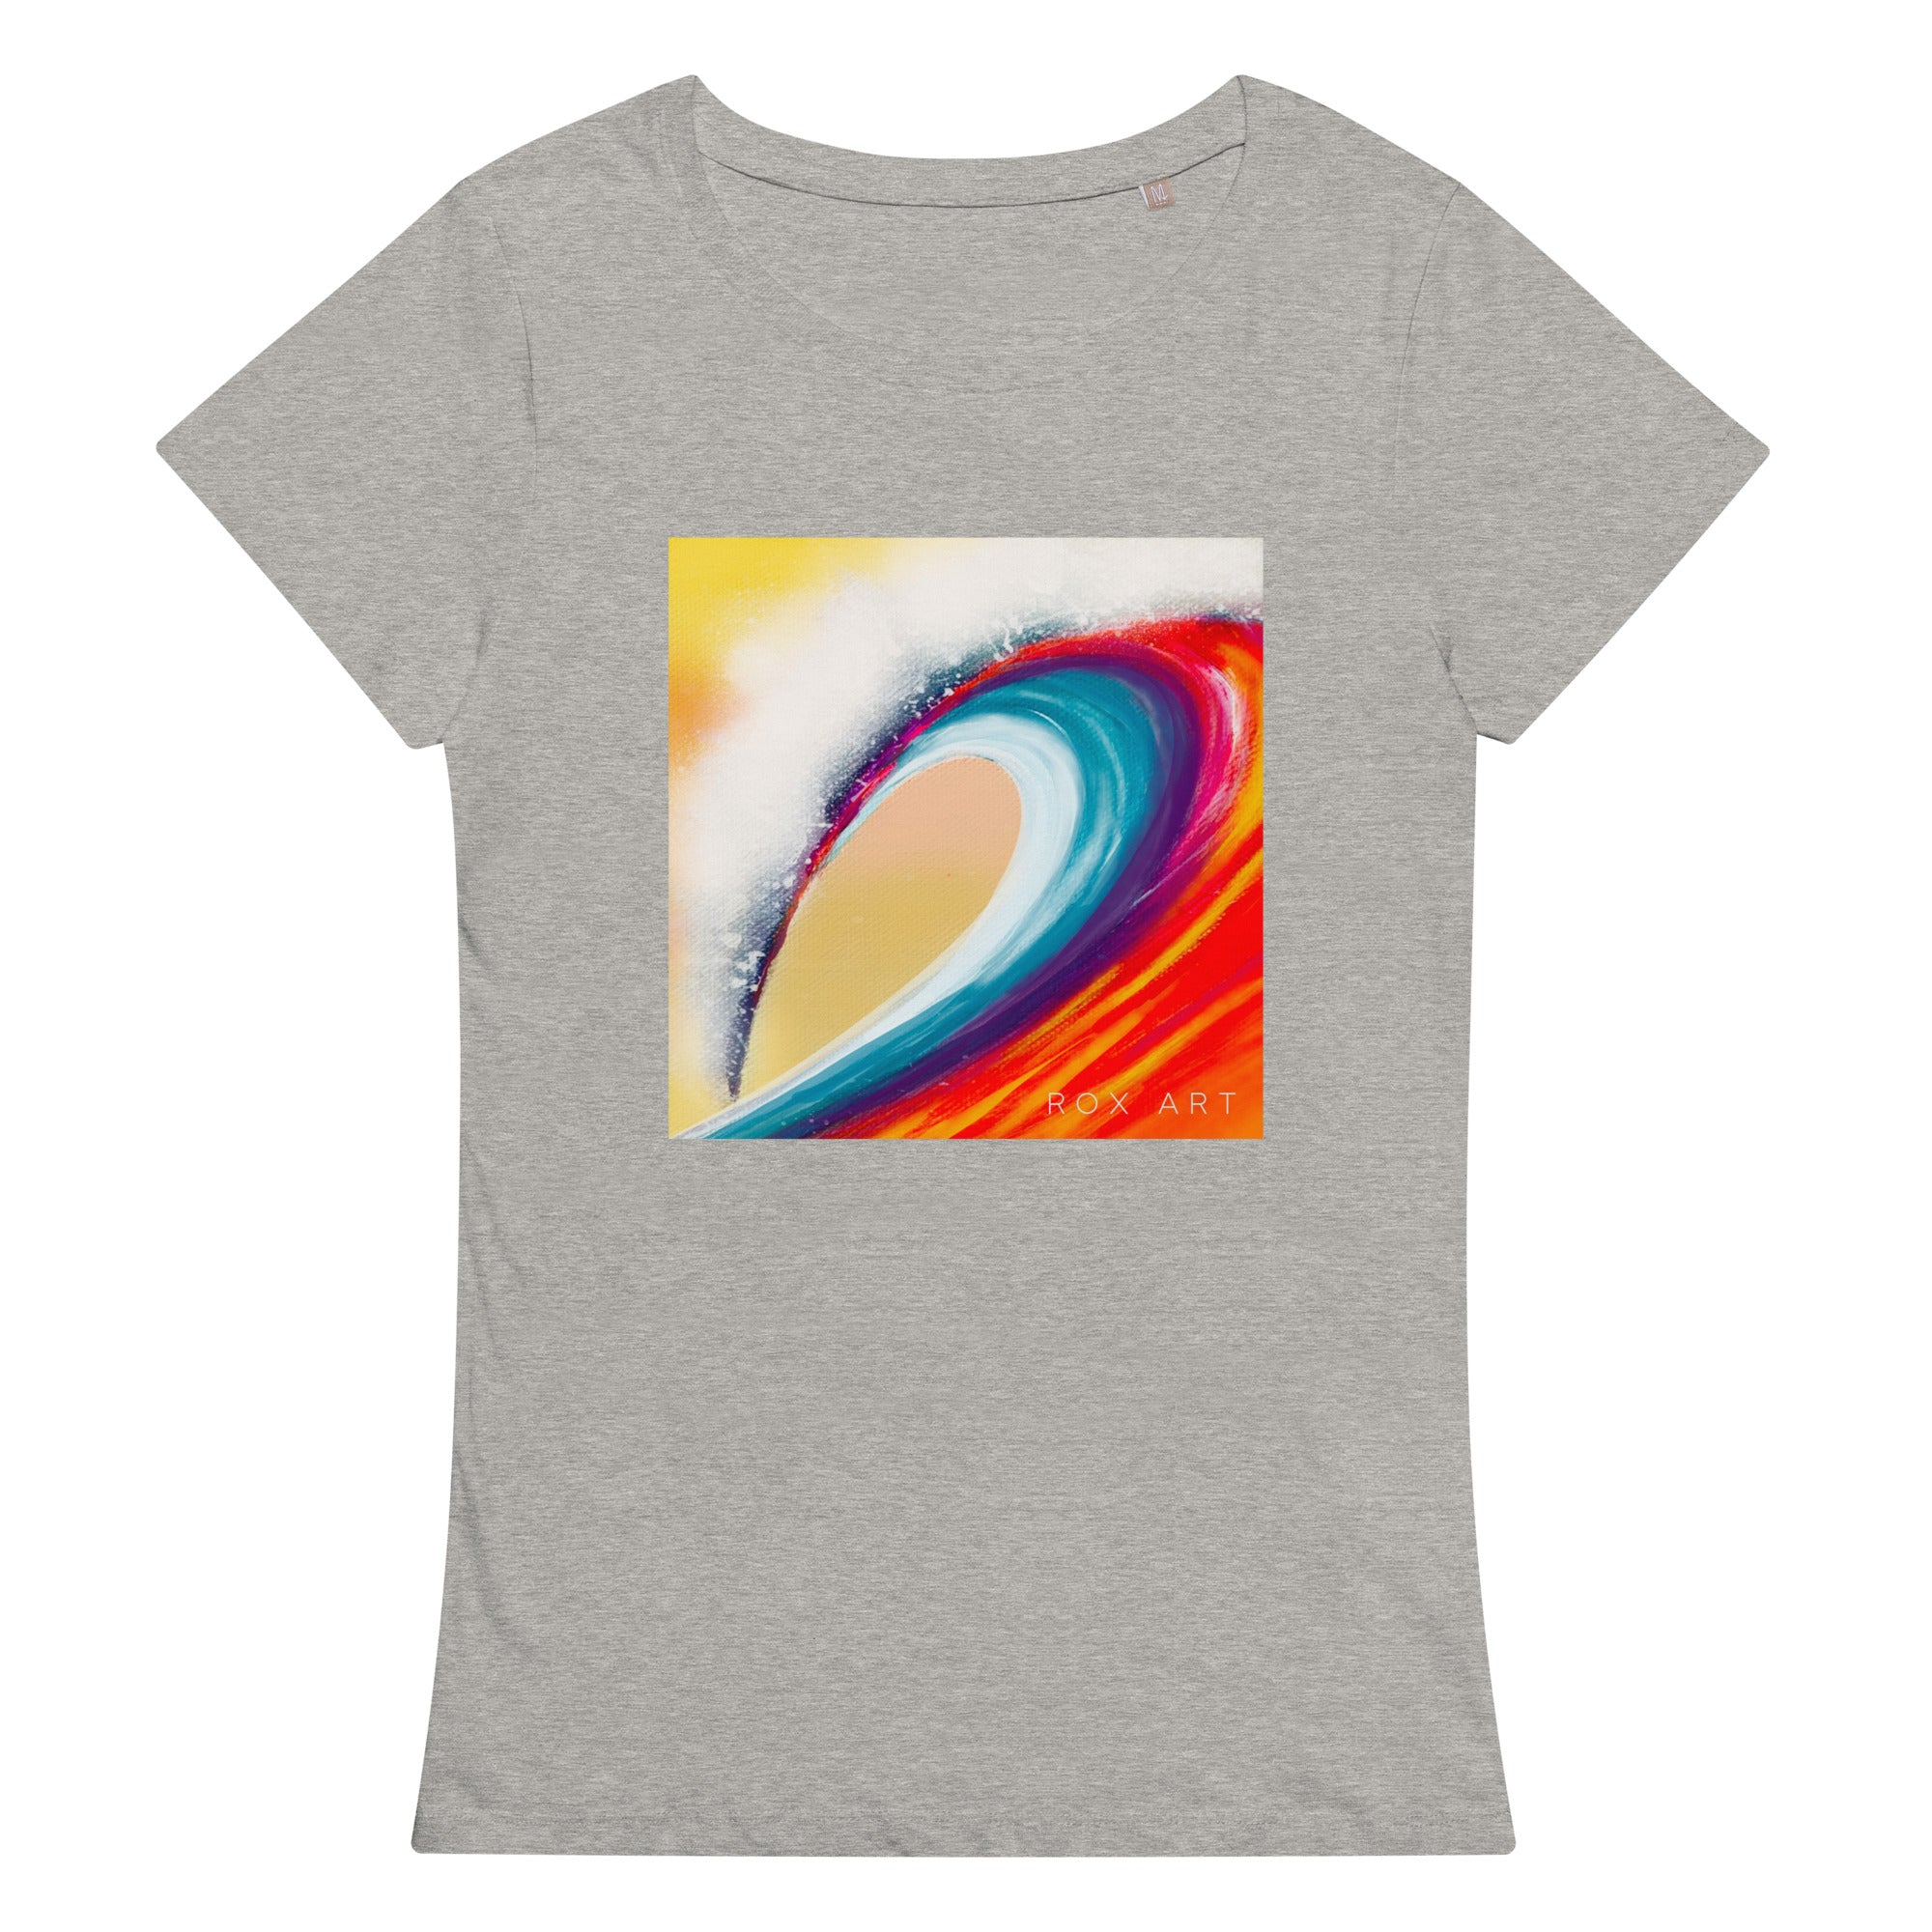 Women's Colorful Wave Tee